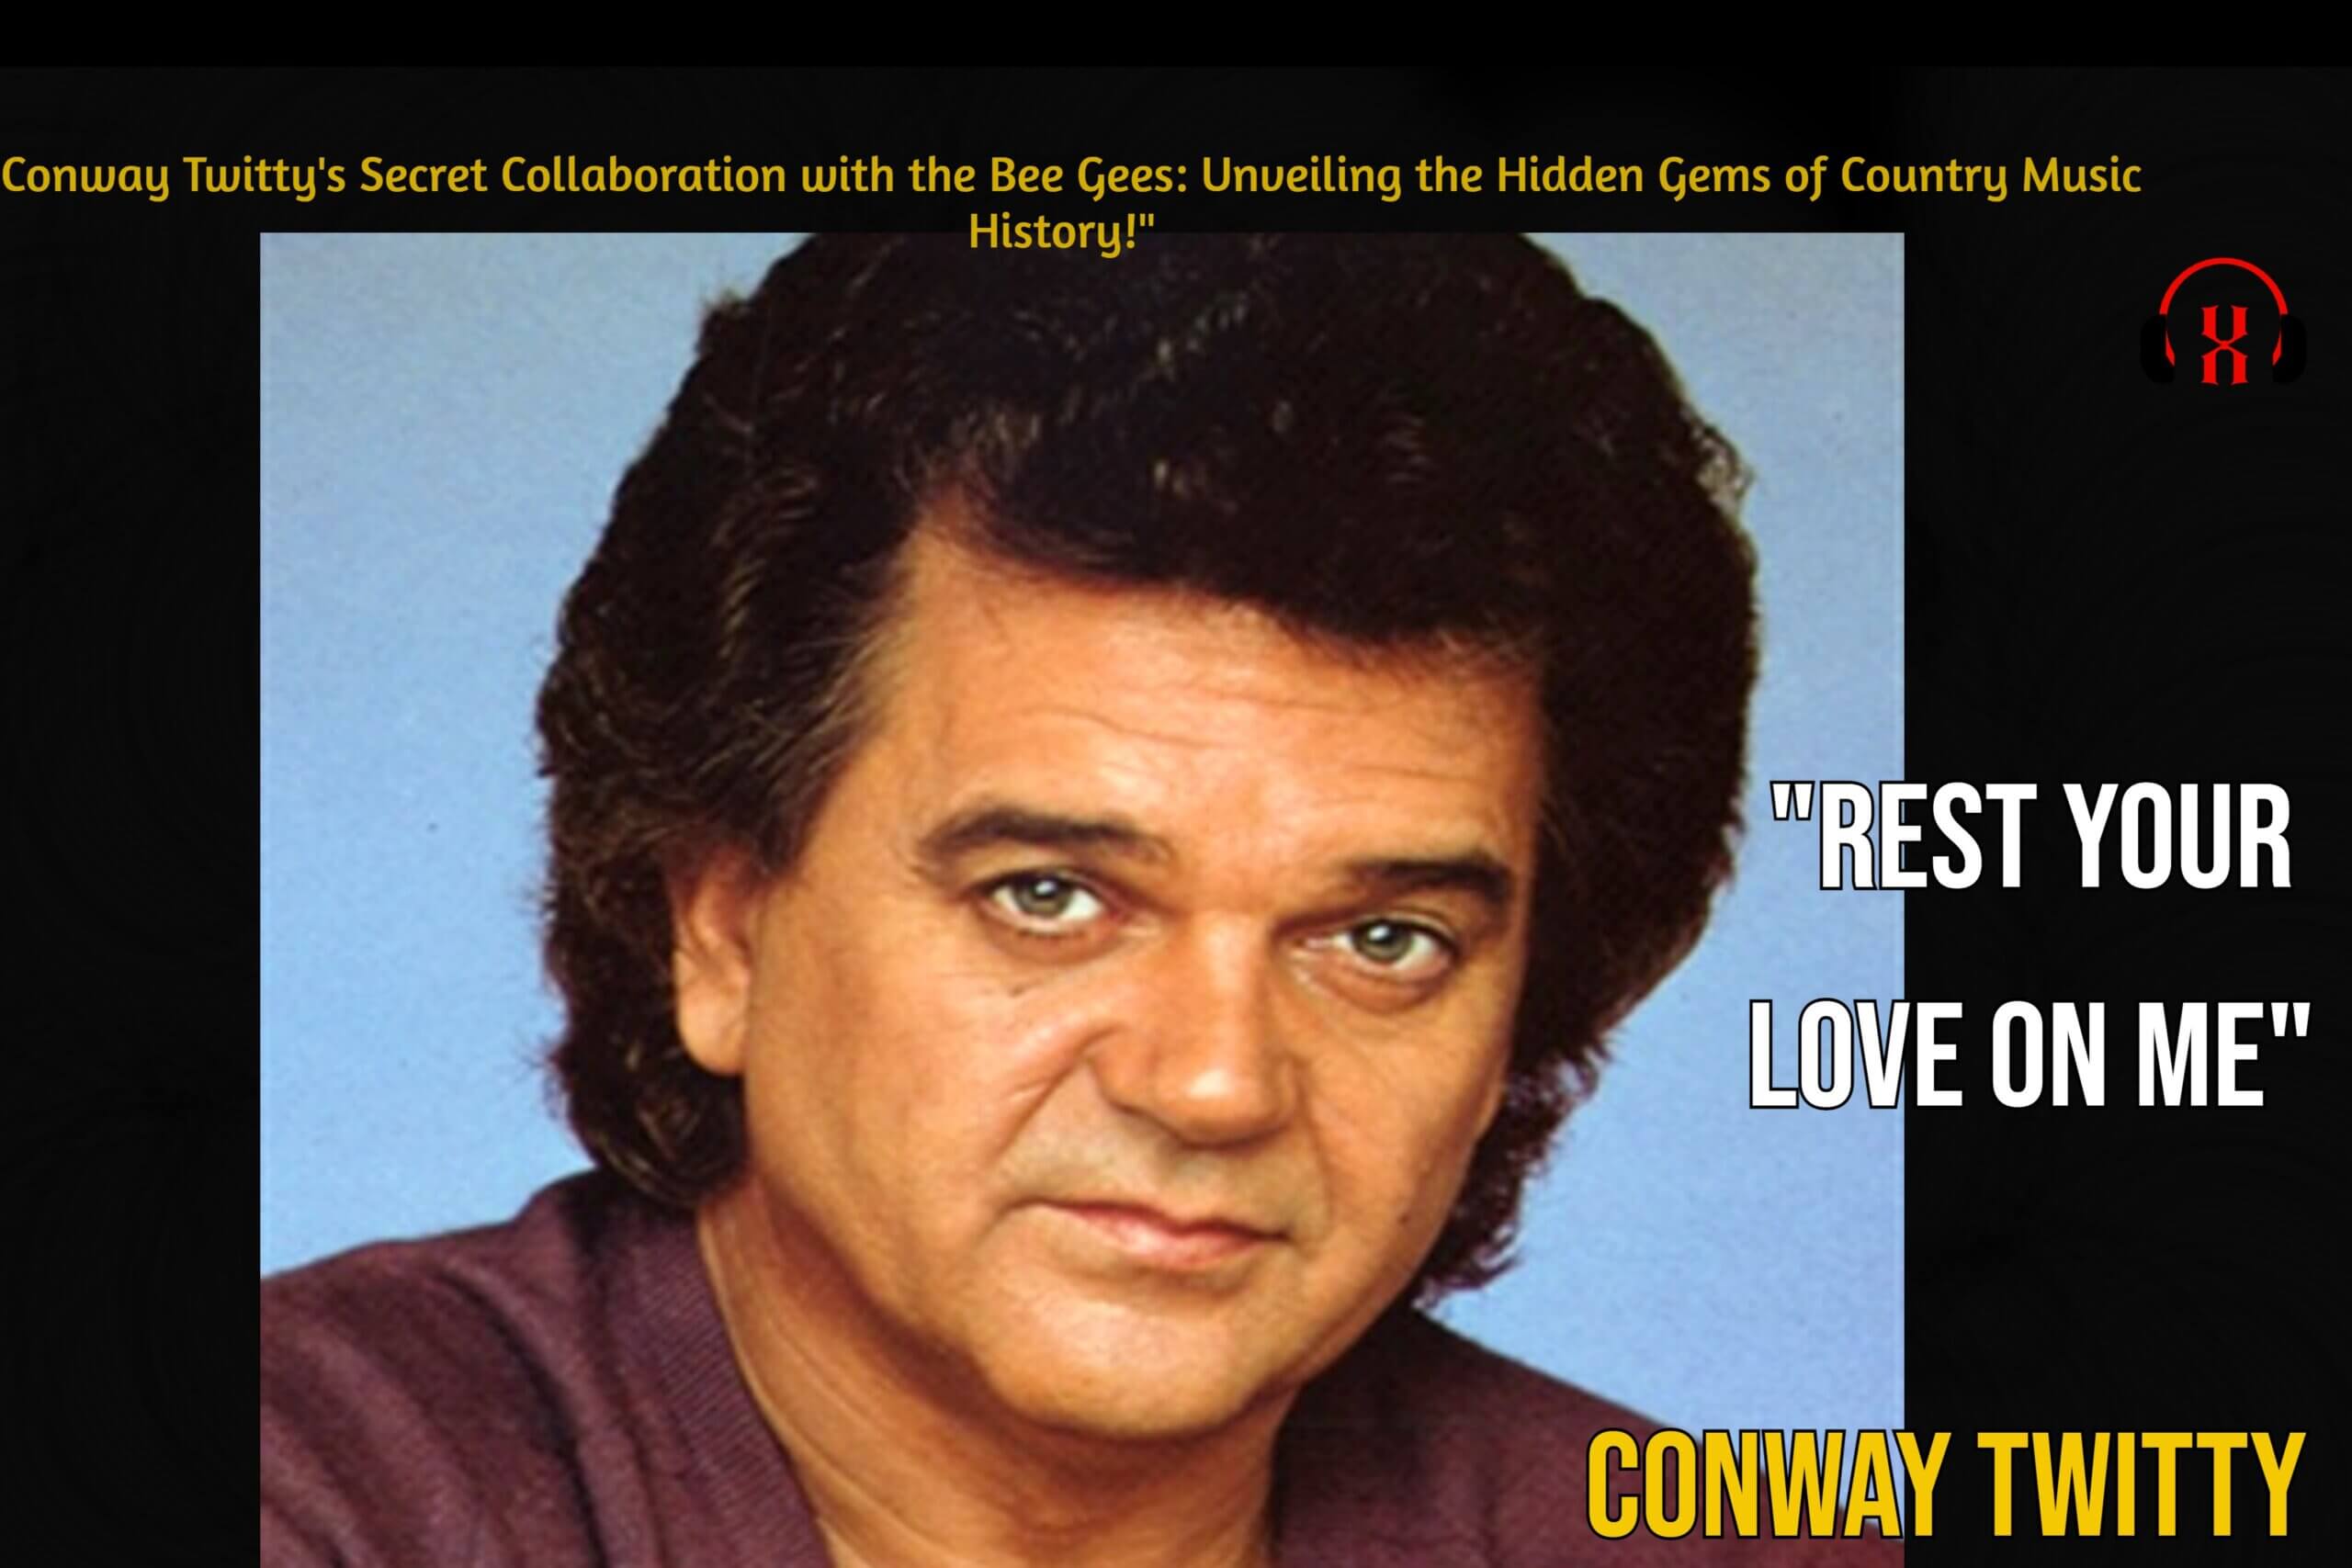 “Conway Twitty’s Secret Collaboration with the Bee Gees: Unveiling the Hidden Gems of Country Music History!”